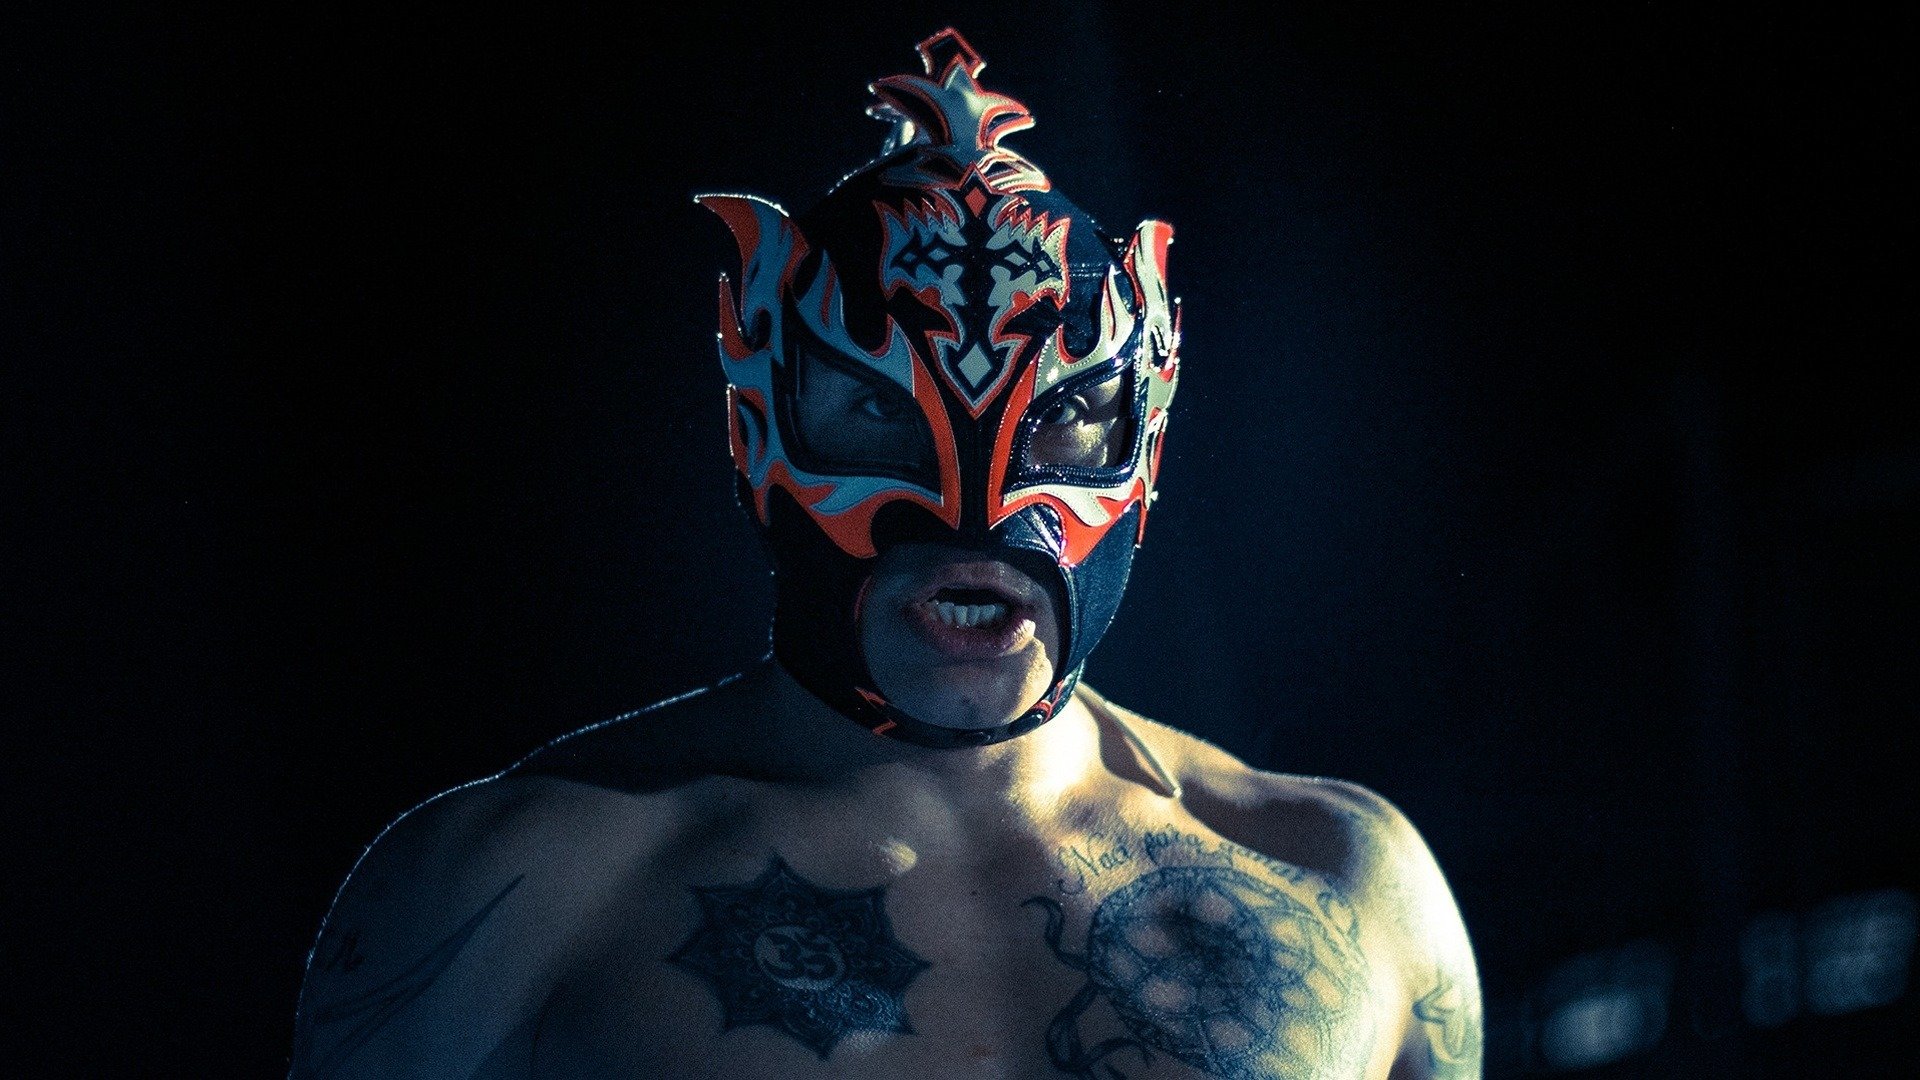 1. The Next Wave of Mexican Luchadores